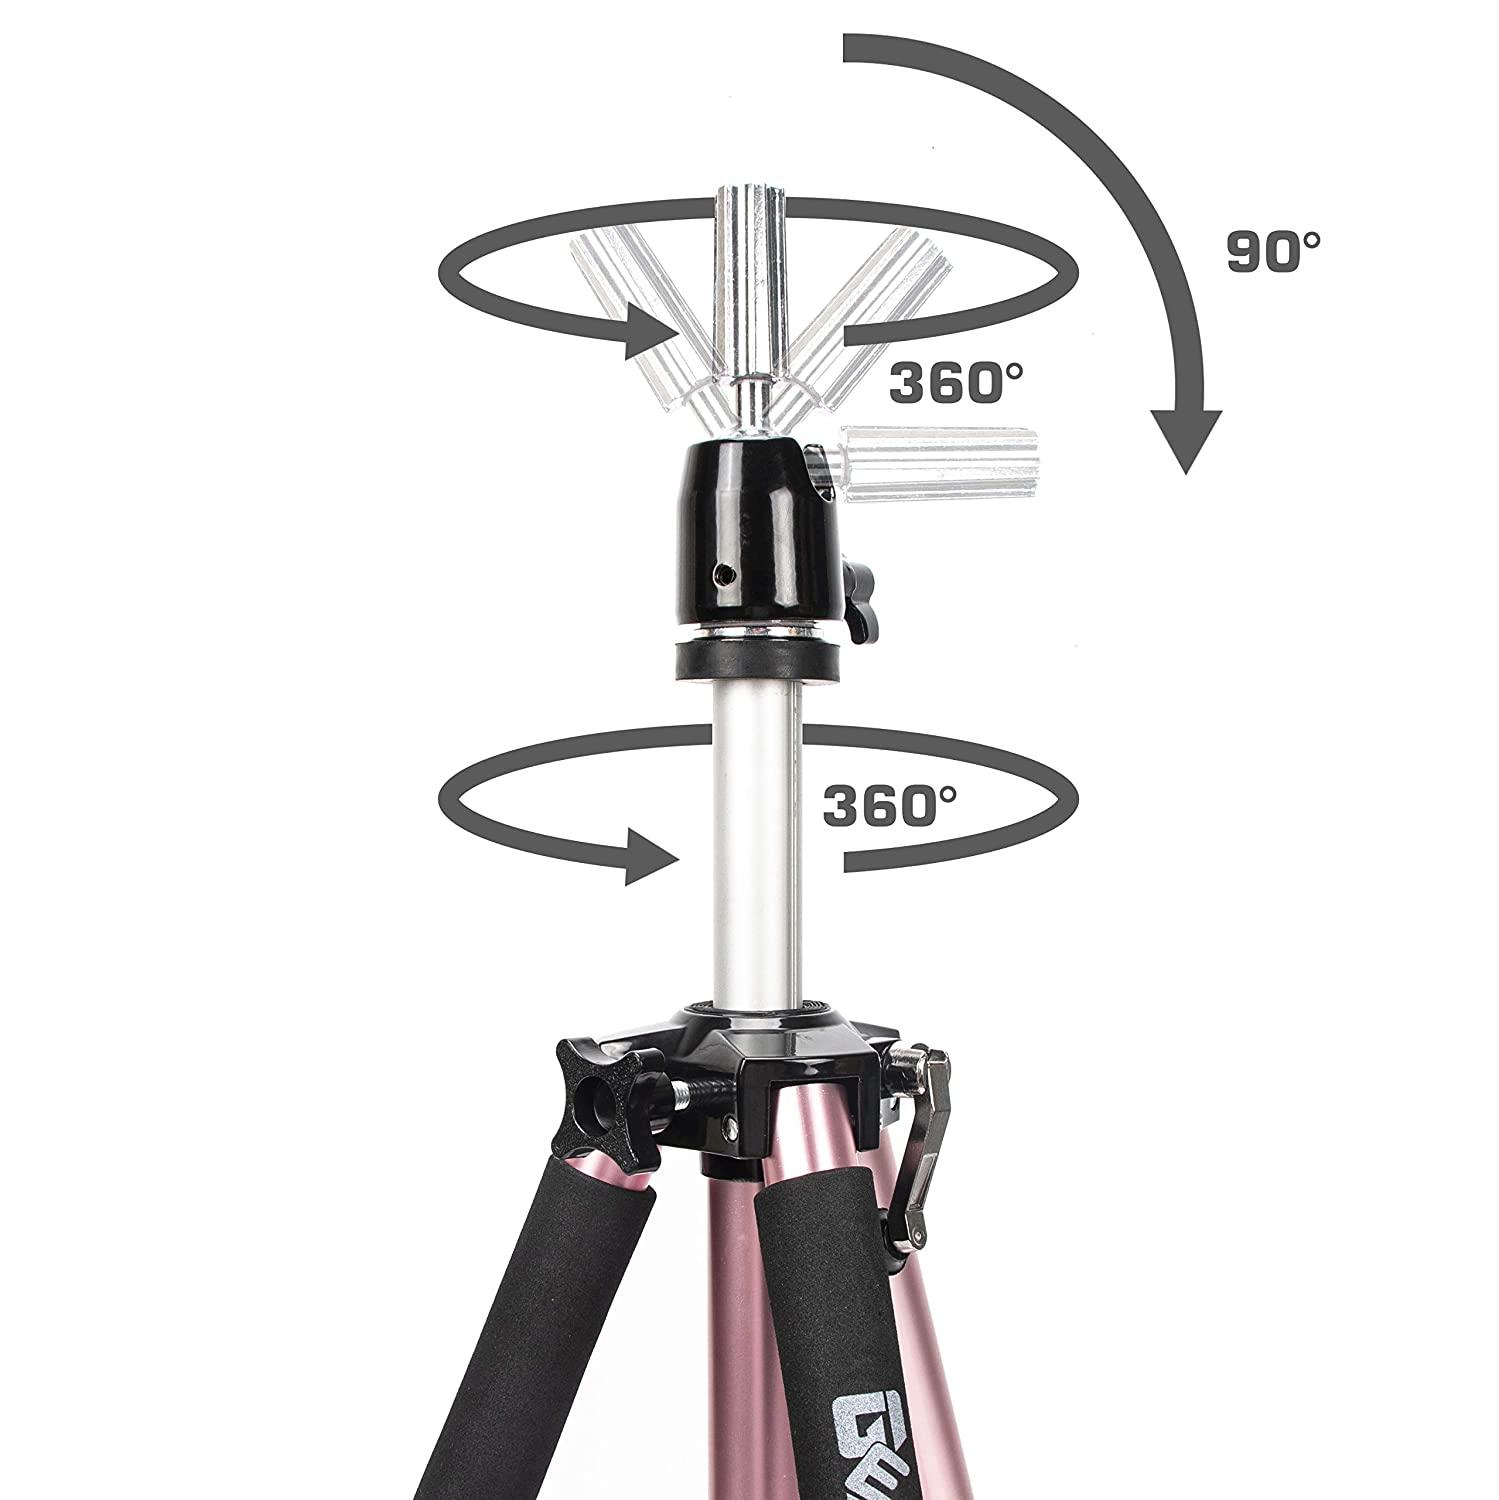  GEX 63 Heavy Duty Mannequin Tripod Stand for Wig